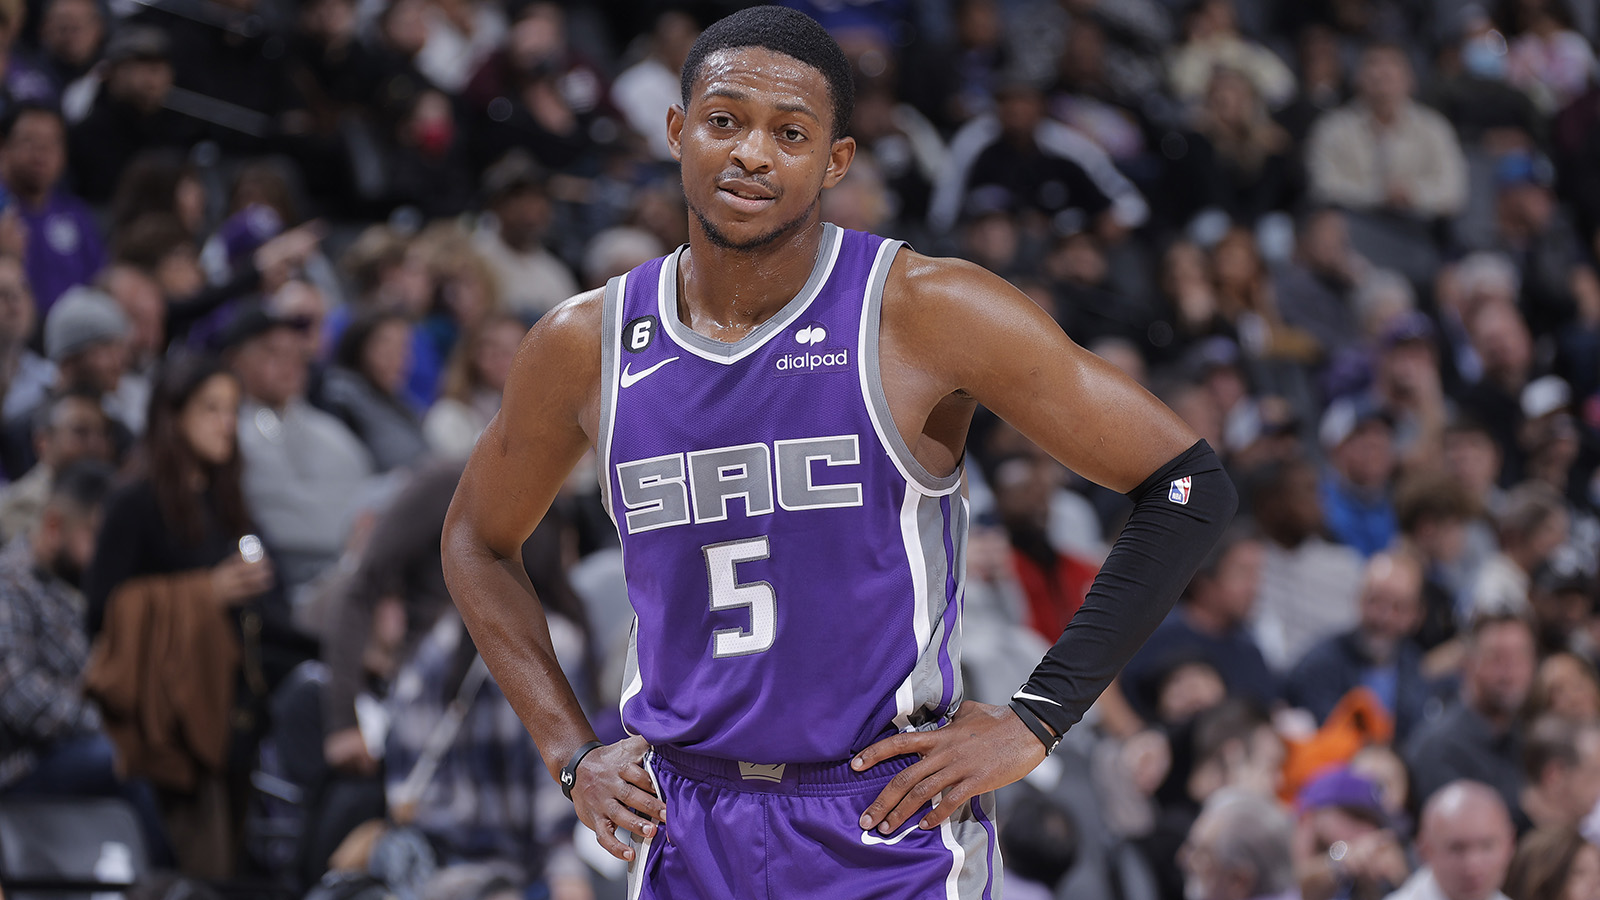 Clutch Player Ladder: De'Aaron Fox finishes the season on top